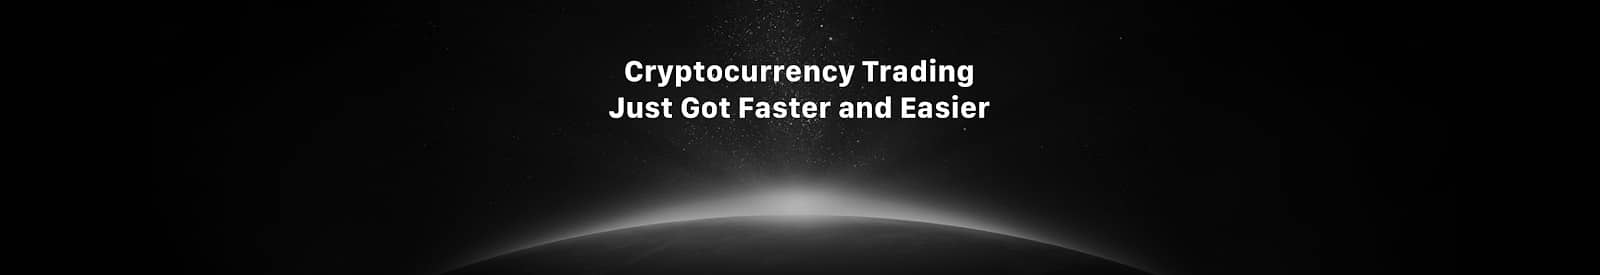 Wisebitcoin’s User-Friendly Interface, Trading Tools, Deep Liquidity and Speed Put the World’s Leading Cryptocurrency Exchanges on Notice - 2